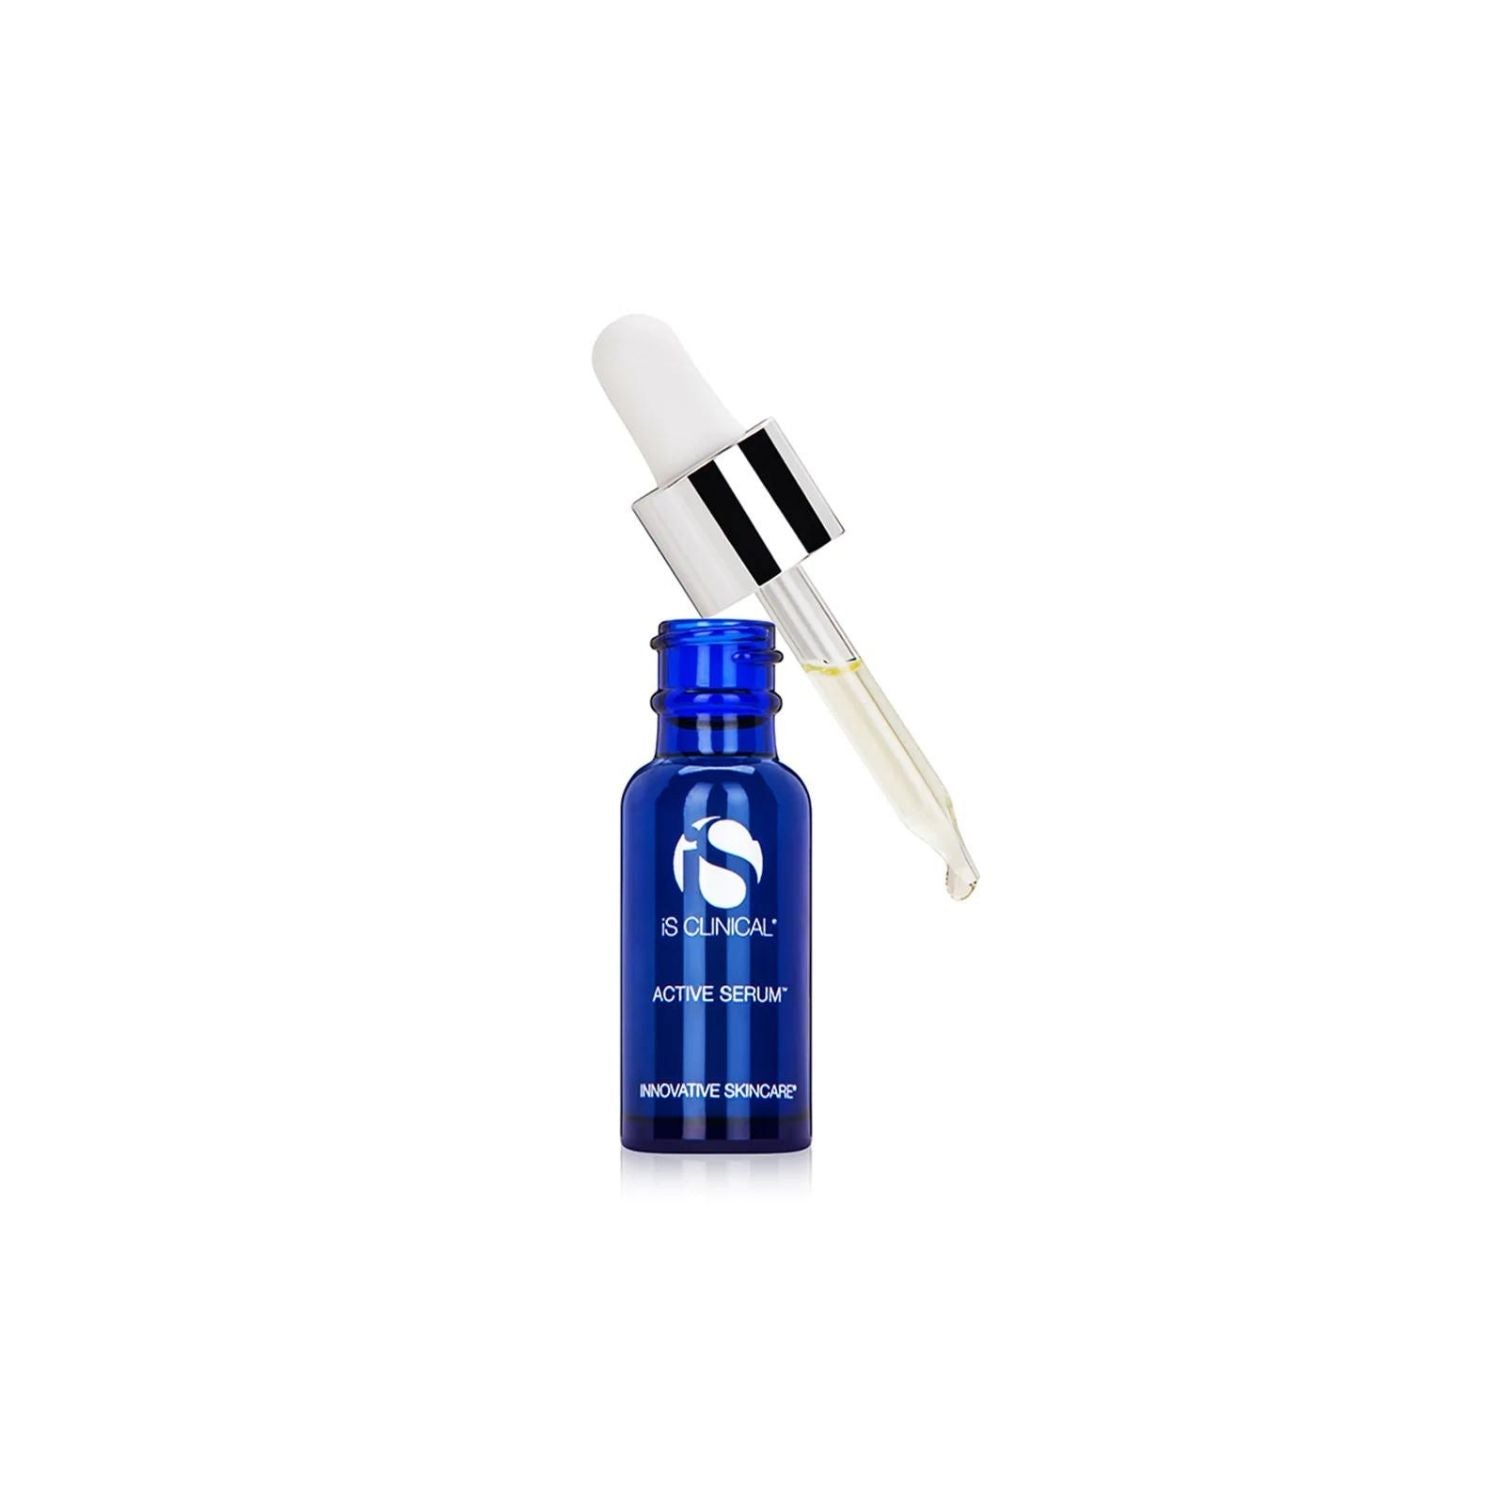 iS Clinical Active Serum 15ml - Dr. Pen Store - iS Clinical Buy Genuine Dr Pen Products with Trust